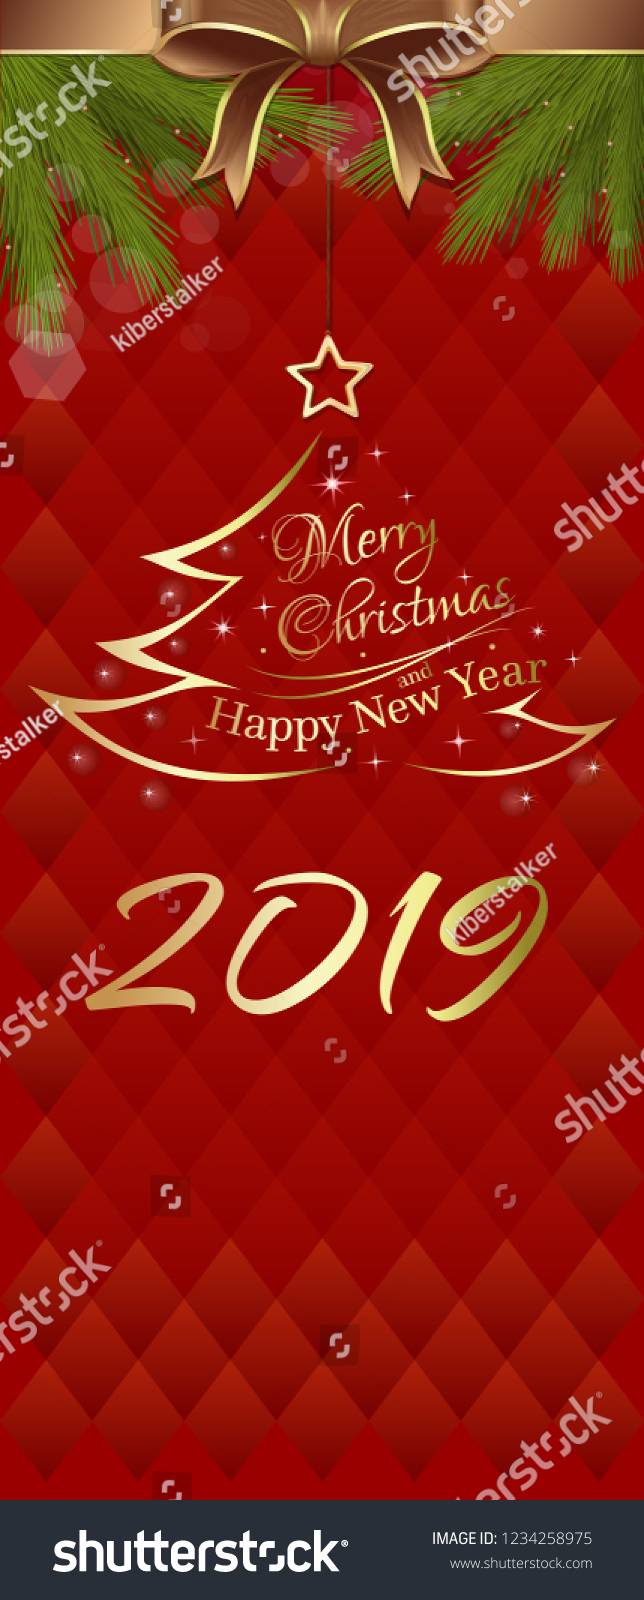 Happy New Year 2019 Celebration Card With Beautiful Red Sparkles